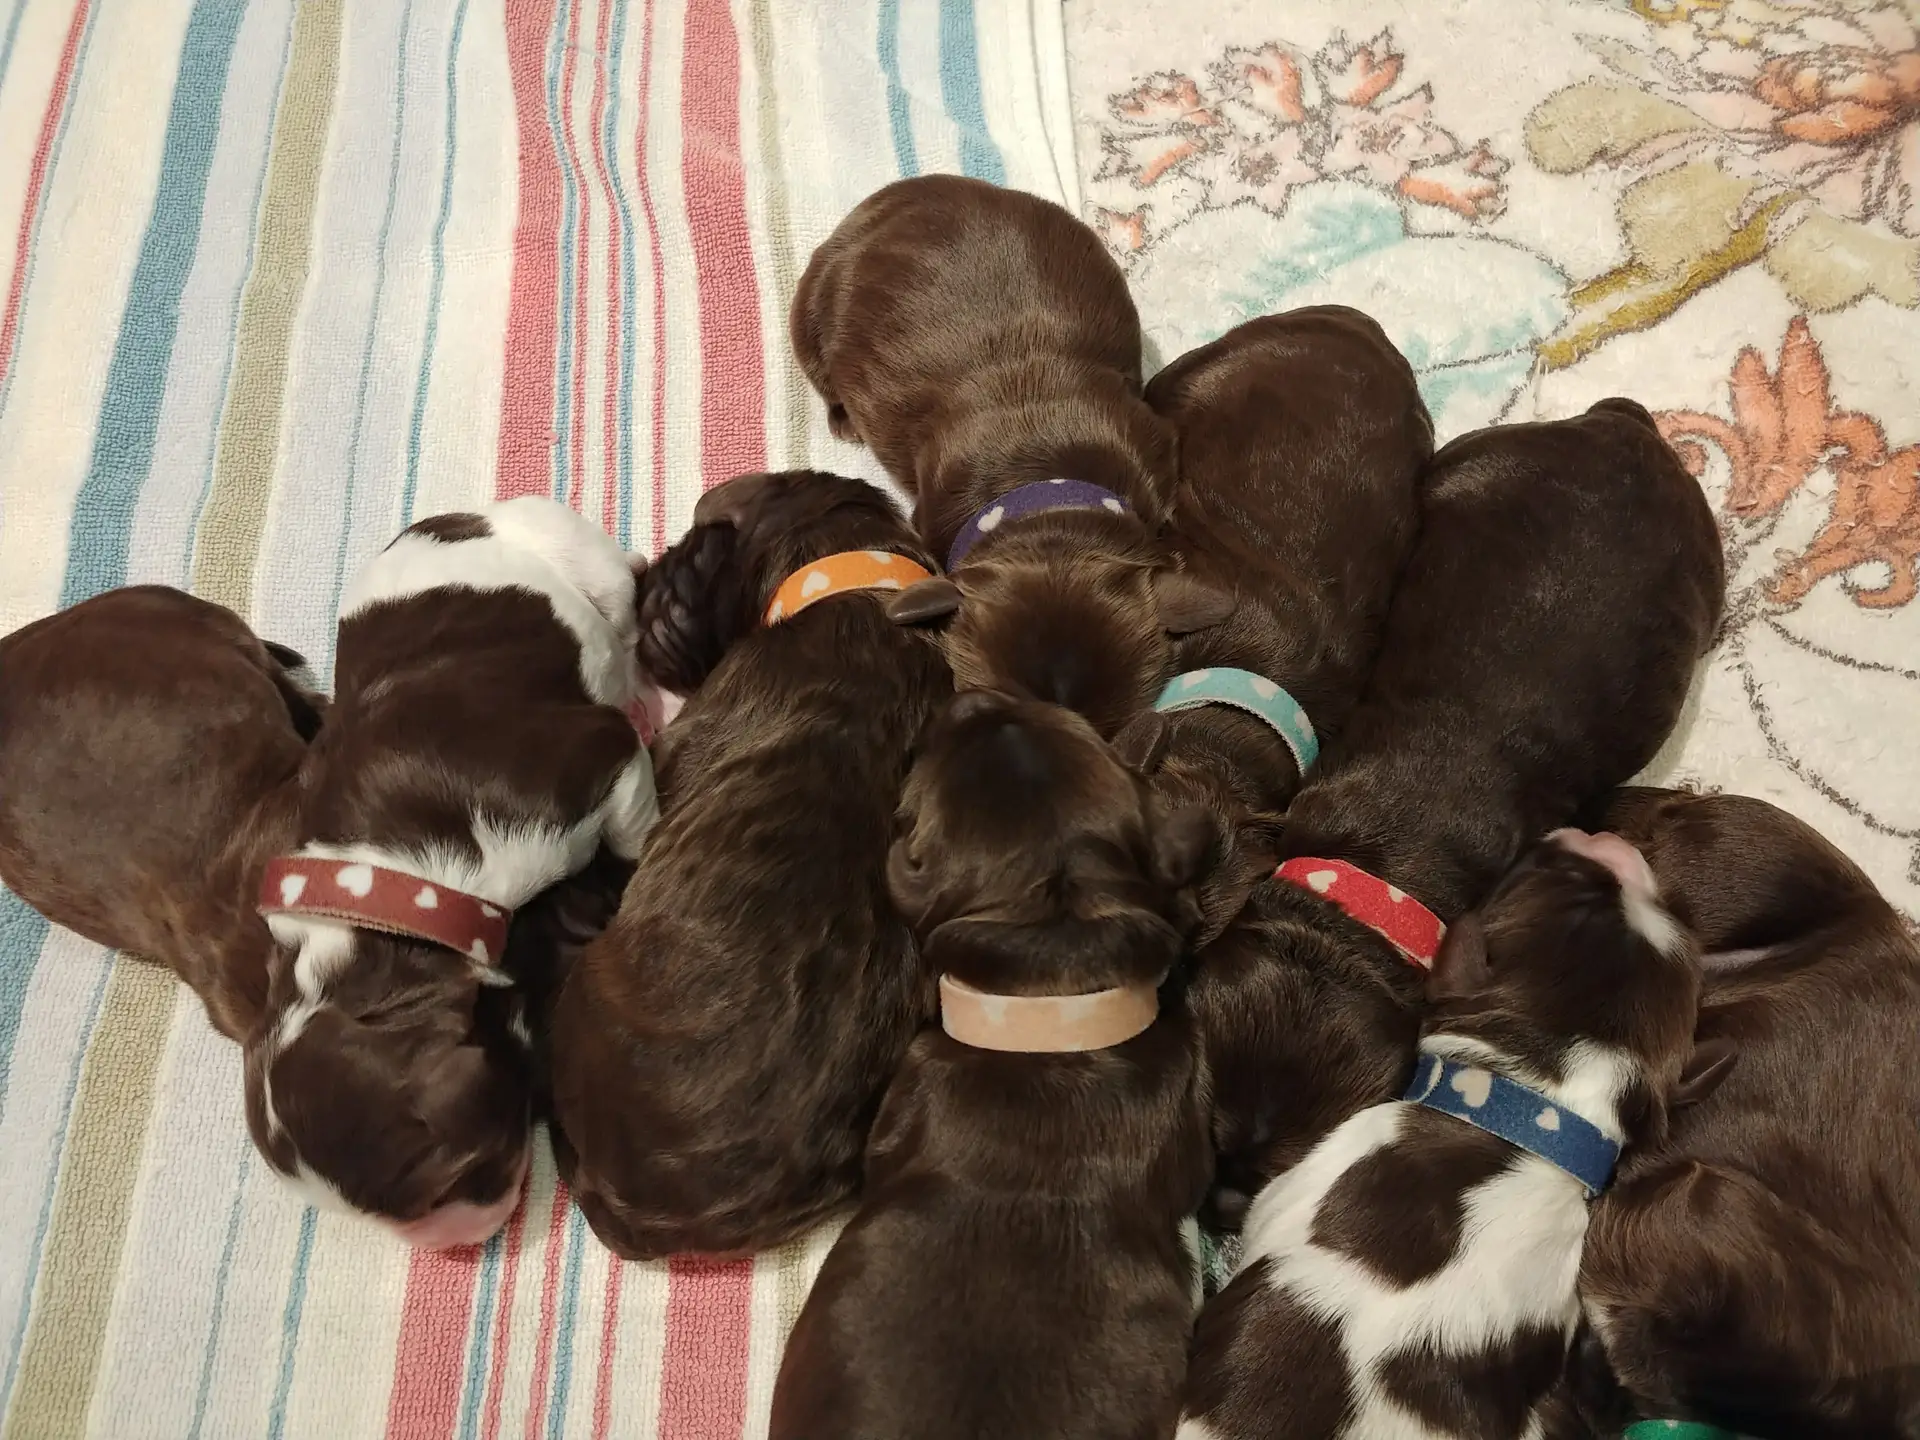 Litter of 9 newborn labradoodle puppies cuddled together. Chocolate color and parti pattern.